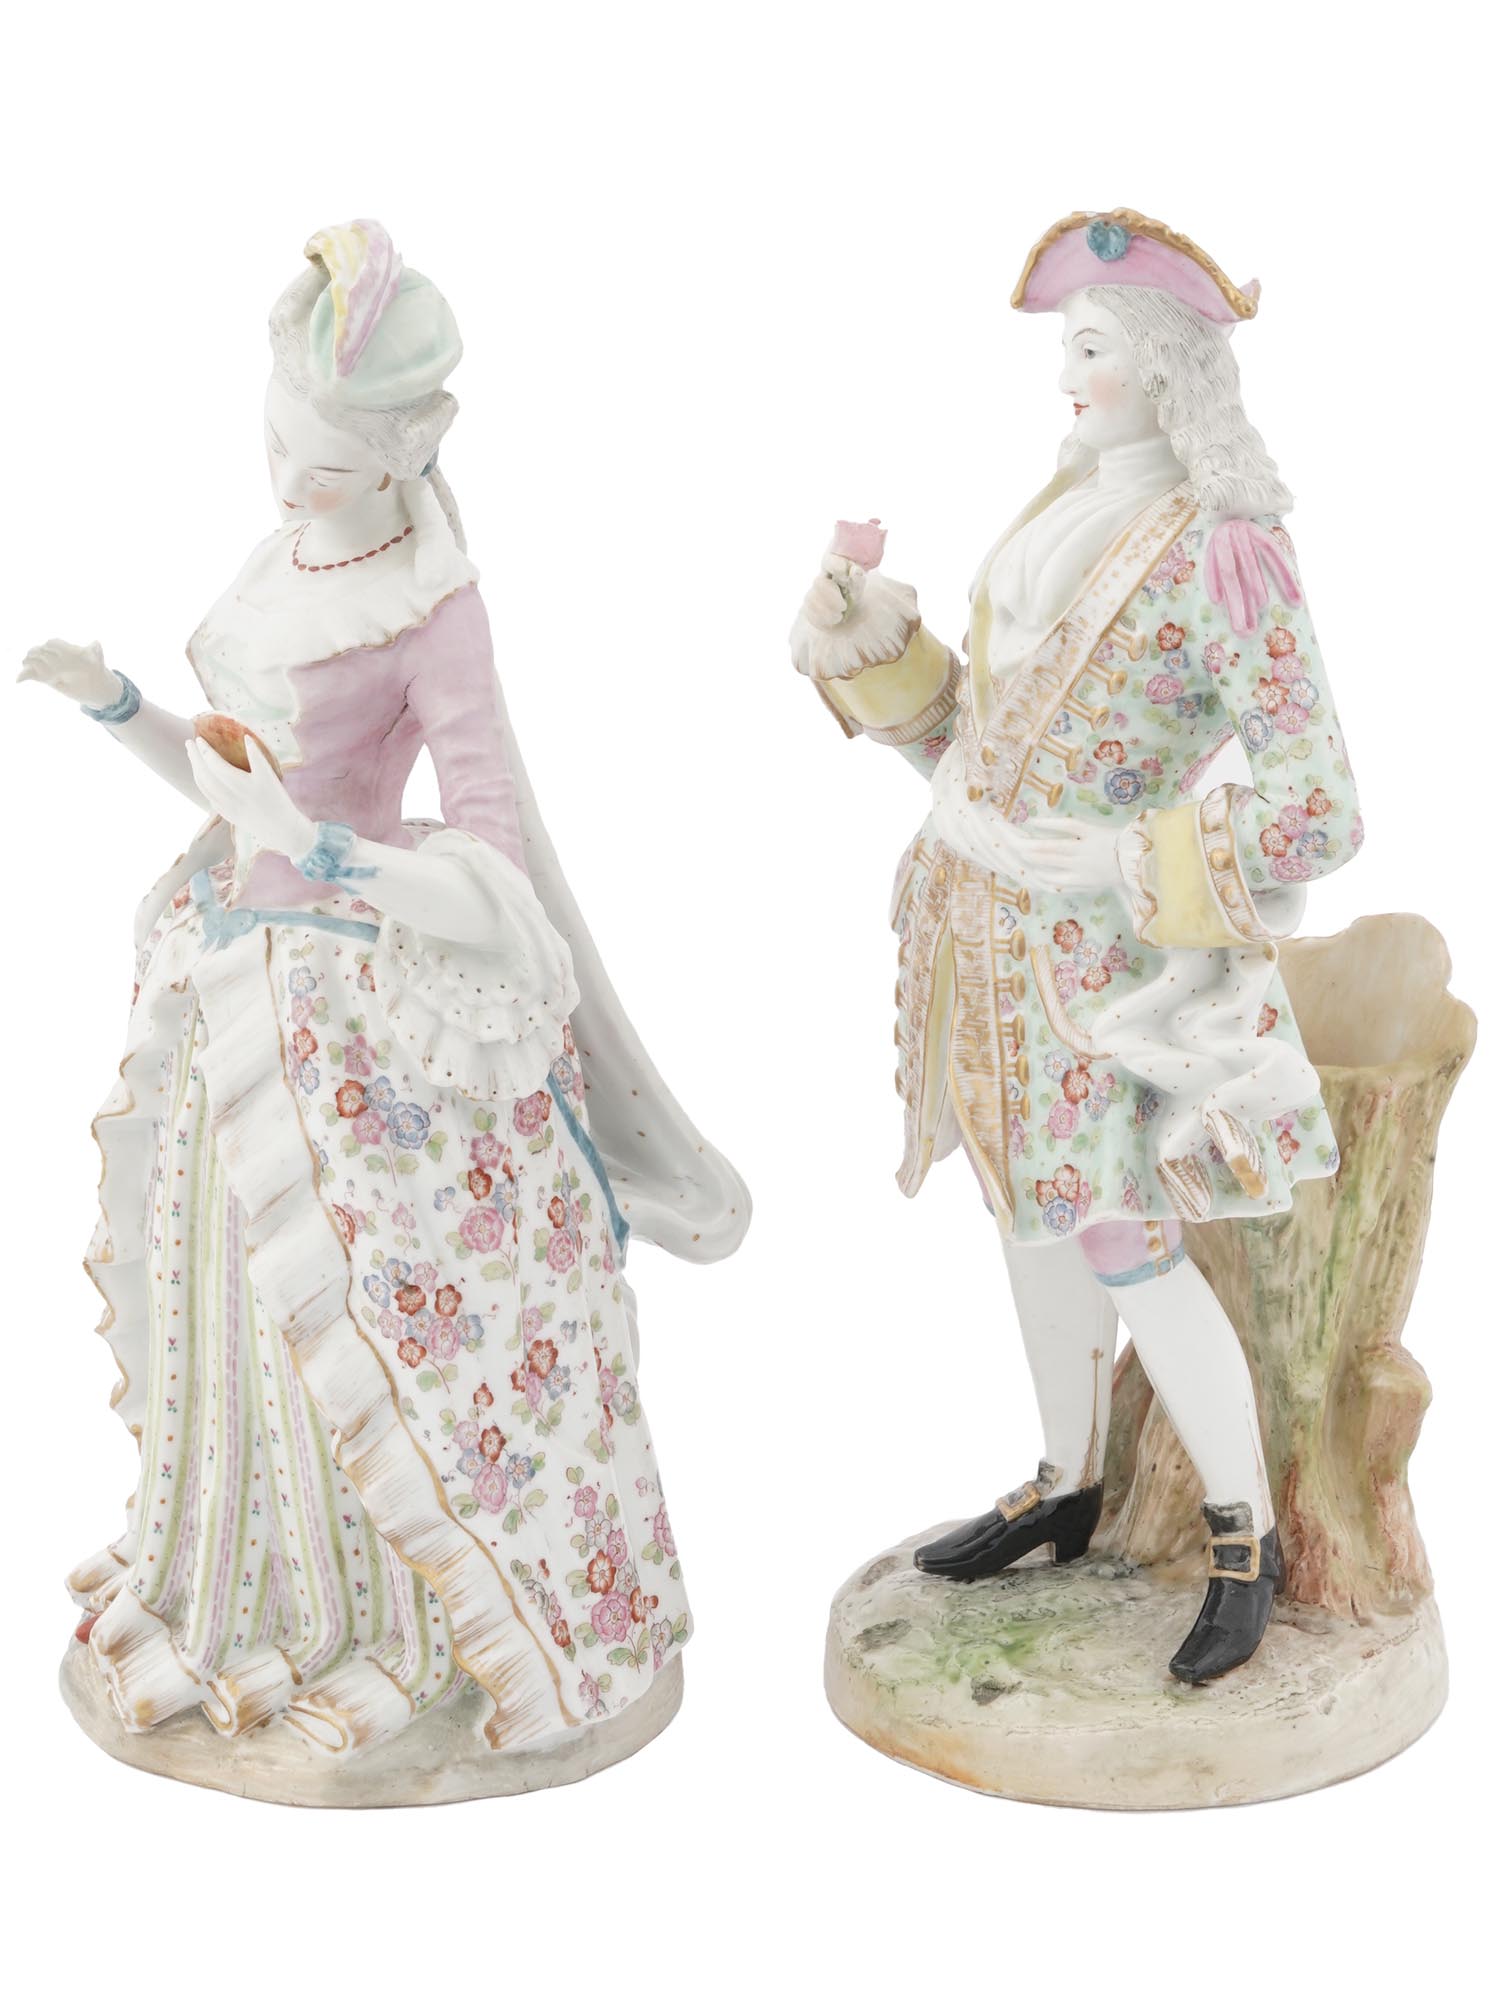 GERMAN ROCOCO PORCELAIN FIGURINES BY MEISSEN PIC-2